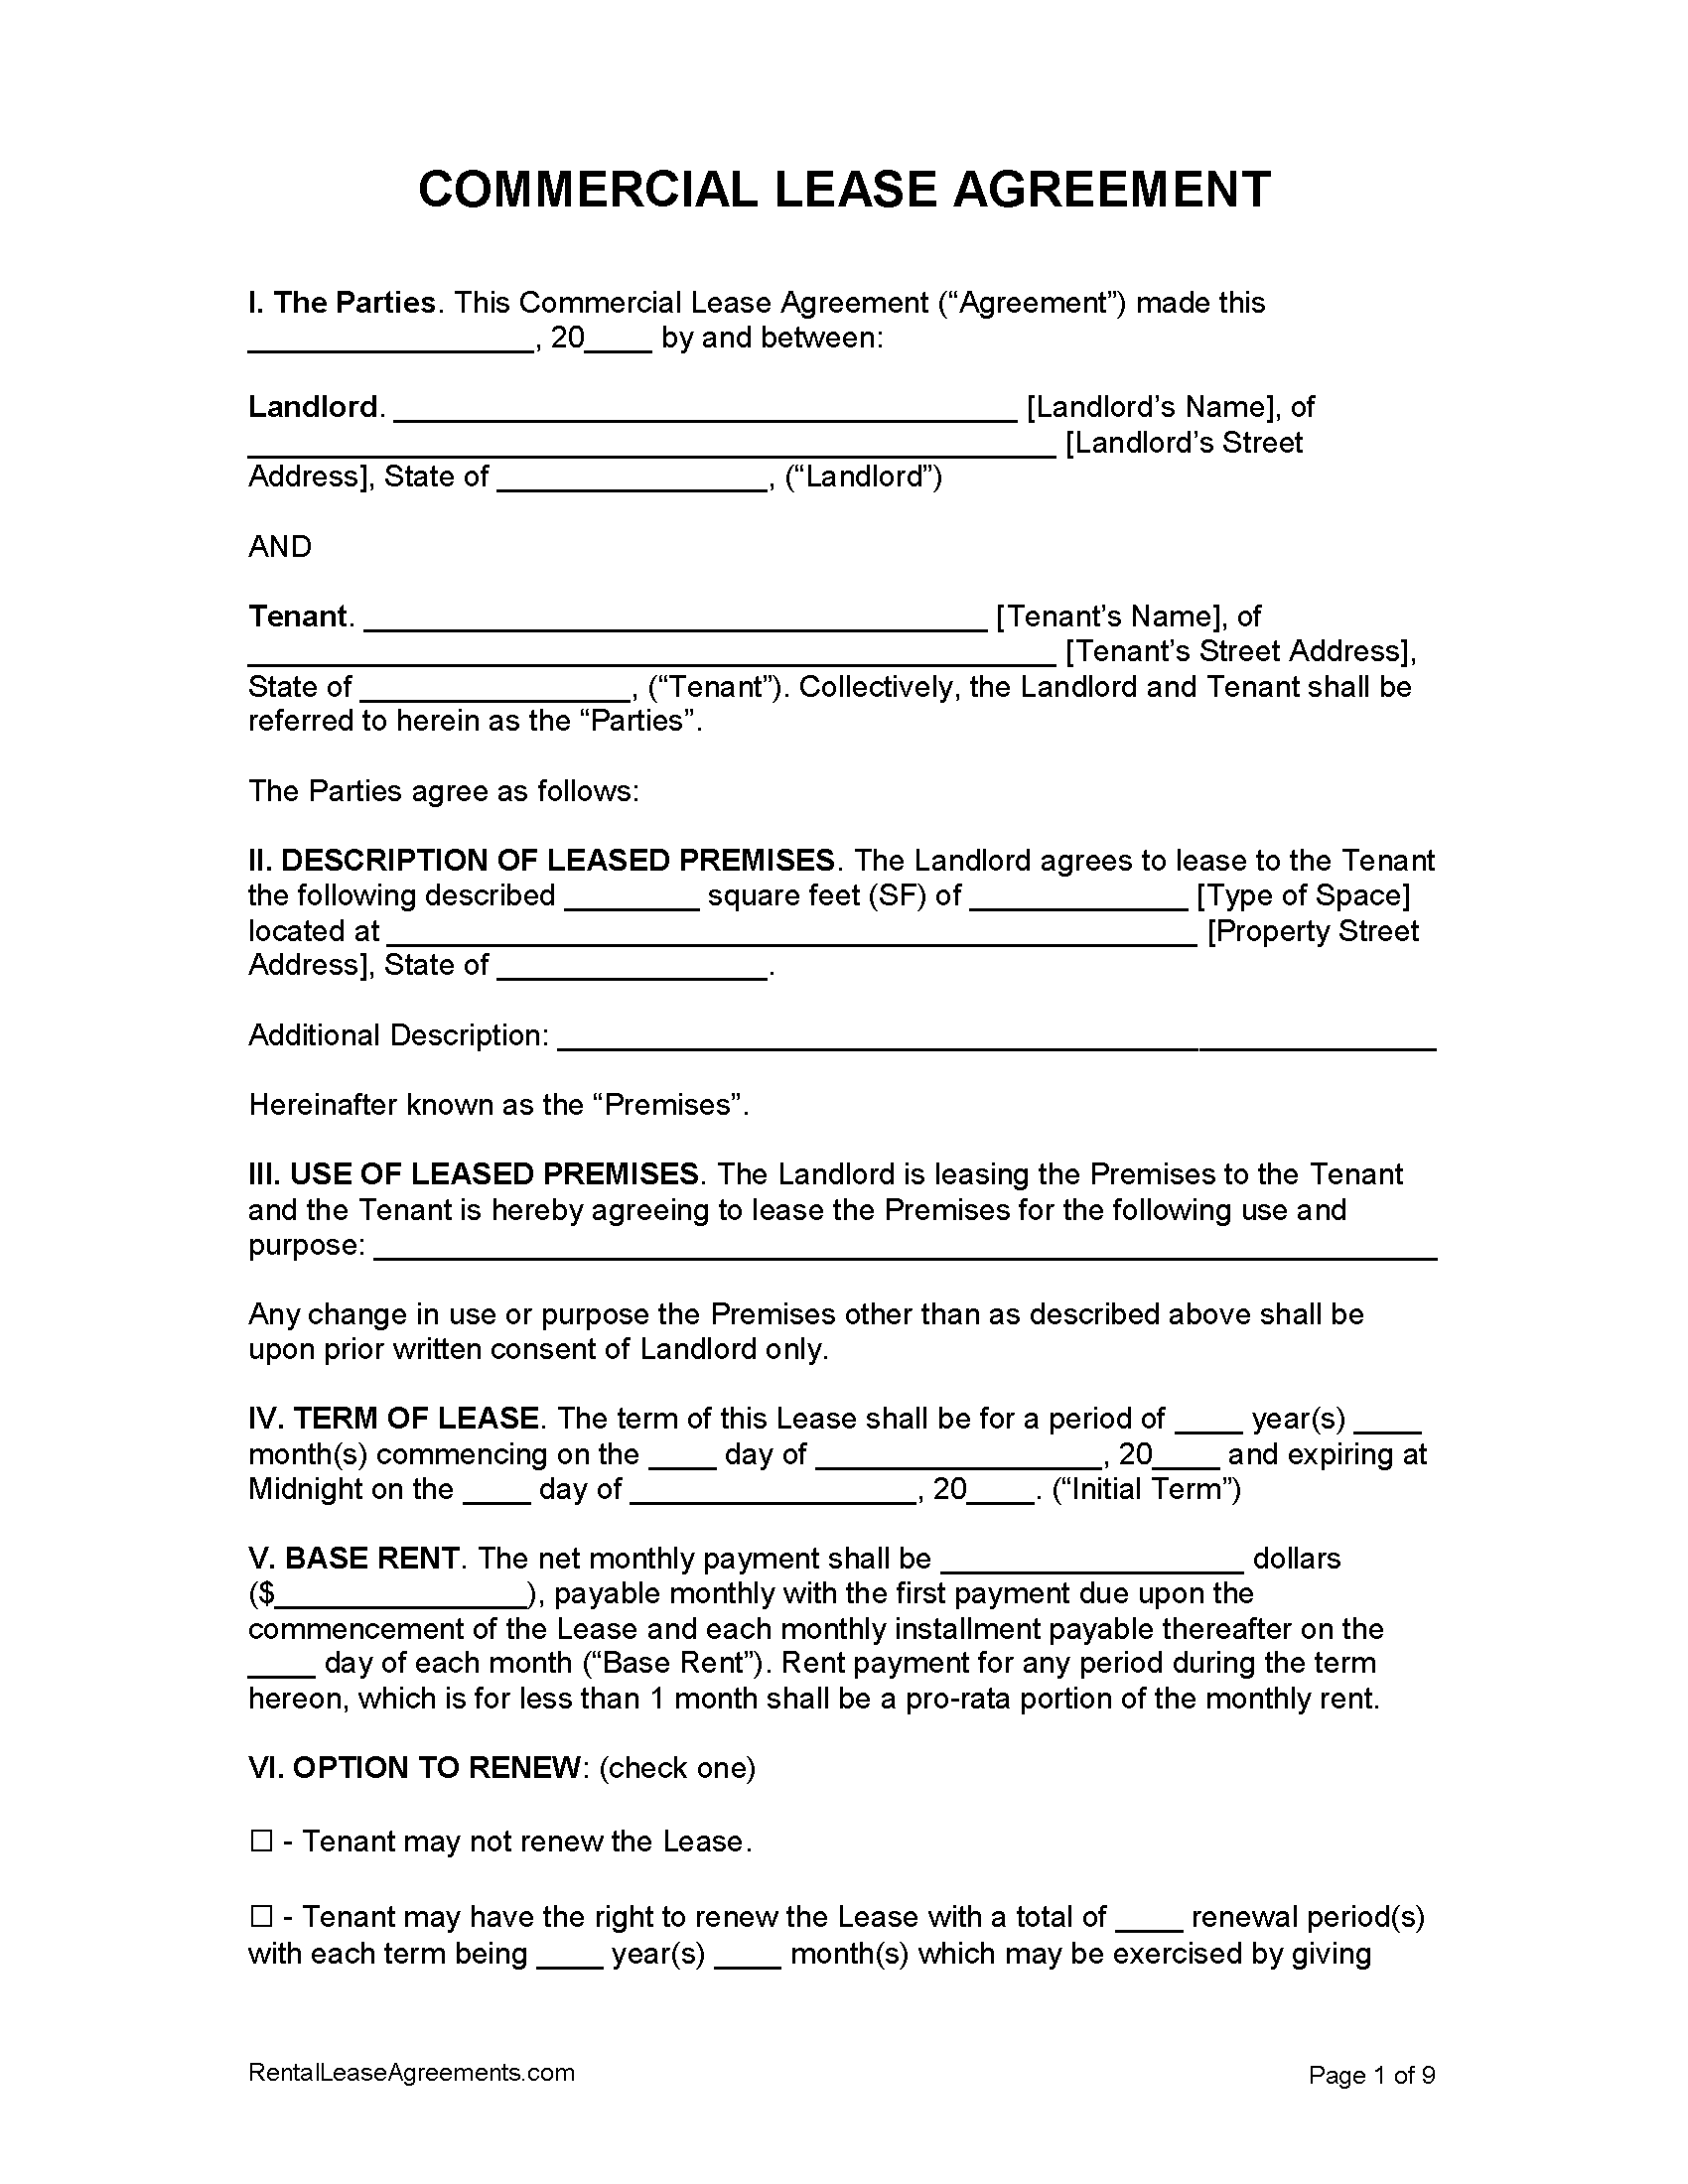 Free Commercial Lease Agreement Template  PDF - Word With free commercial property management agreement template